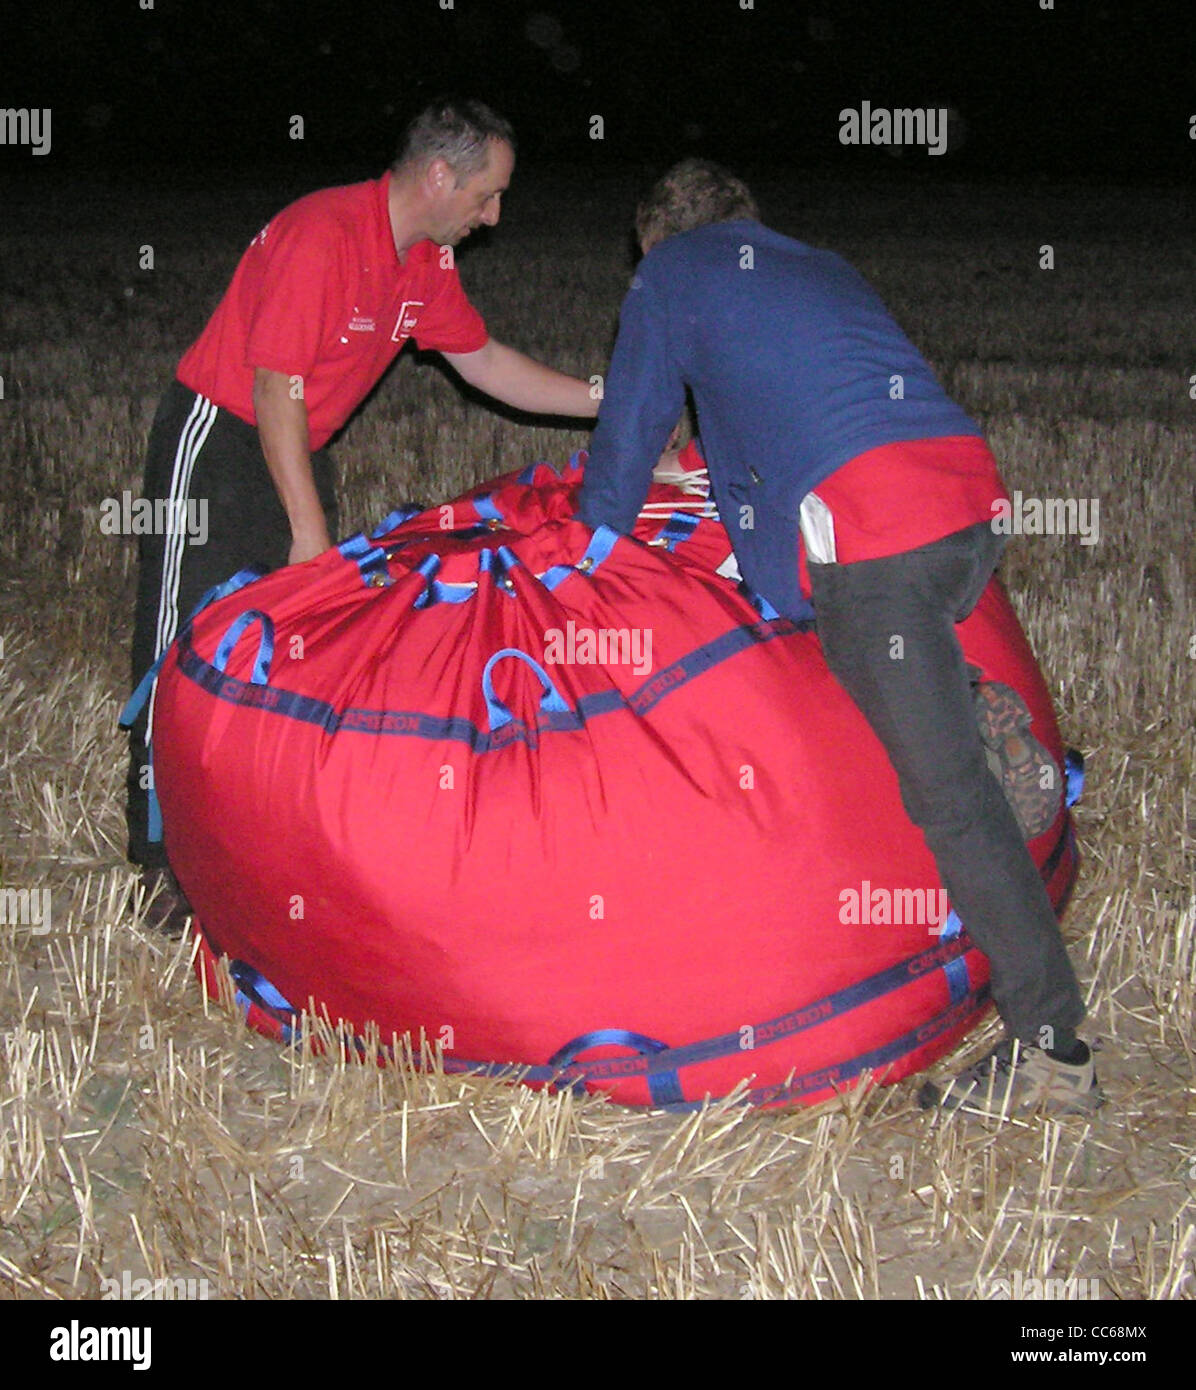 A large hot air balloon in its transport bag, Stock Photo